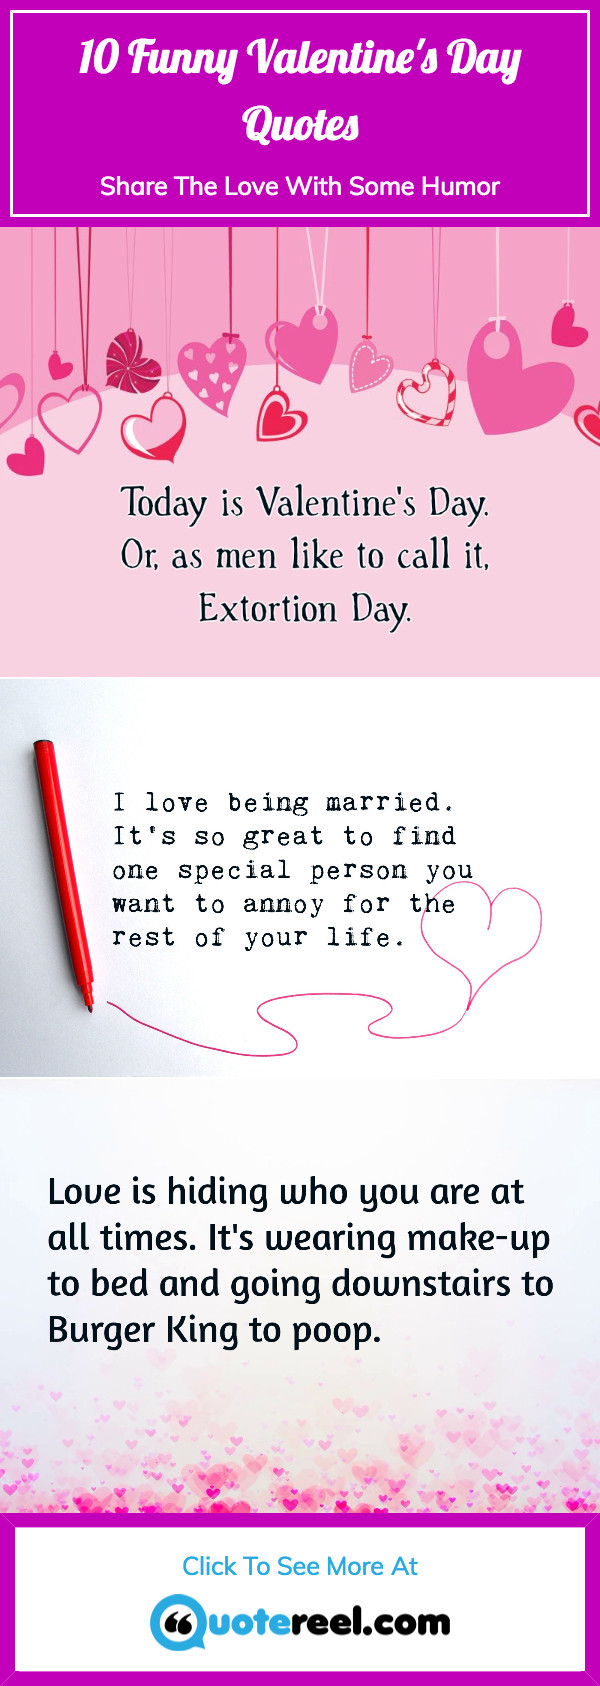 Valentines Day Quotes Funny
 Funny Valentine s Quotes That Add A Bit Humor To The